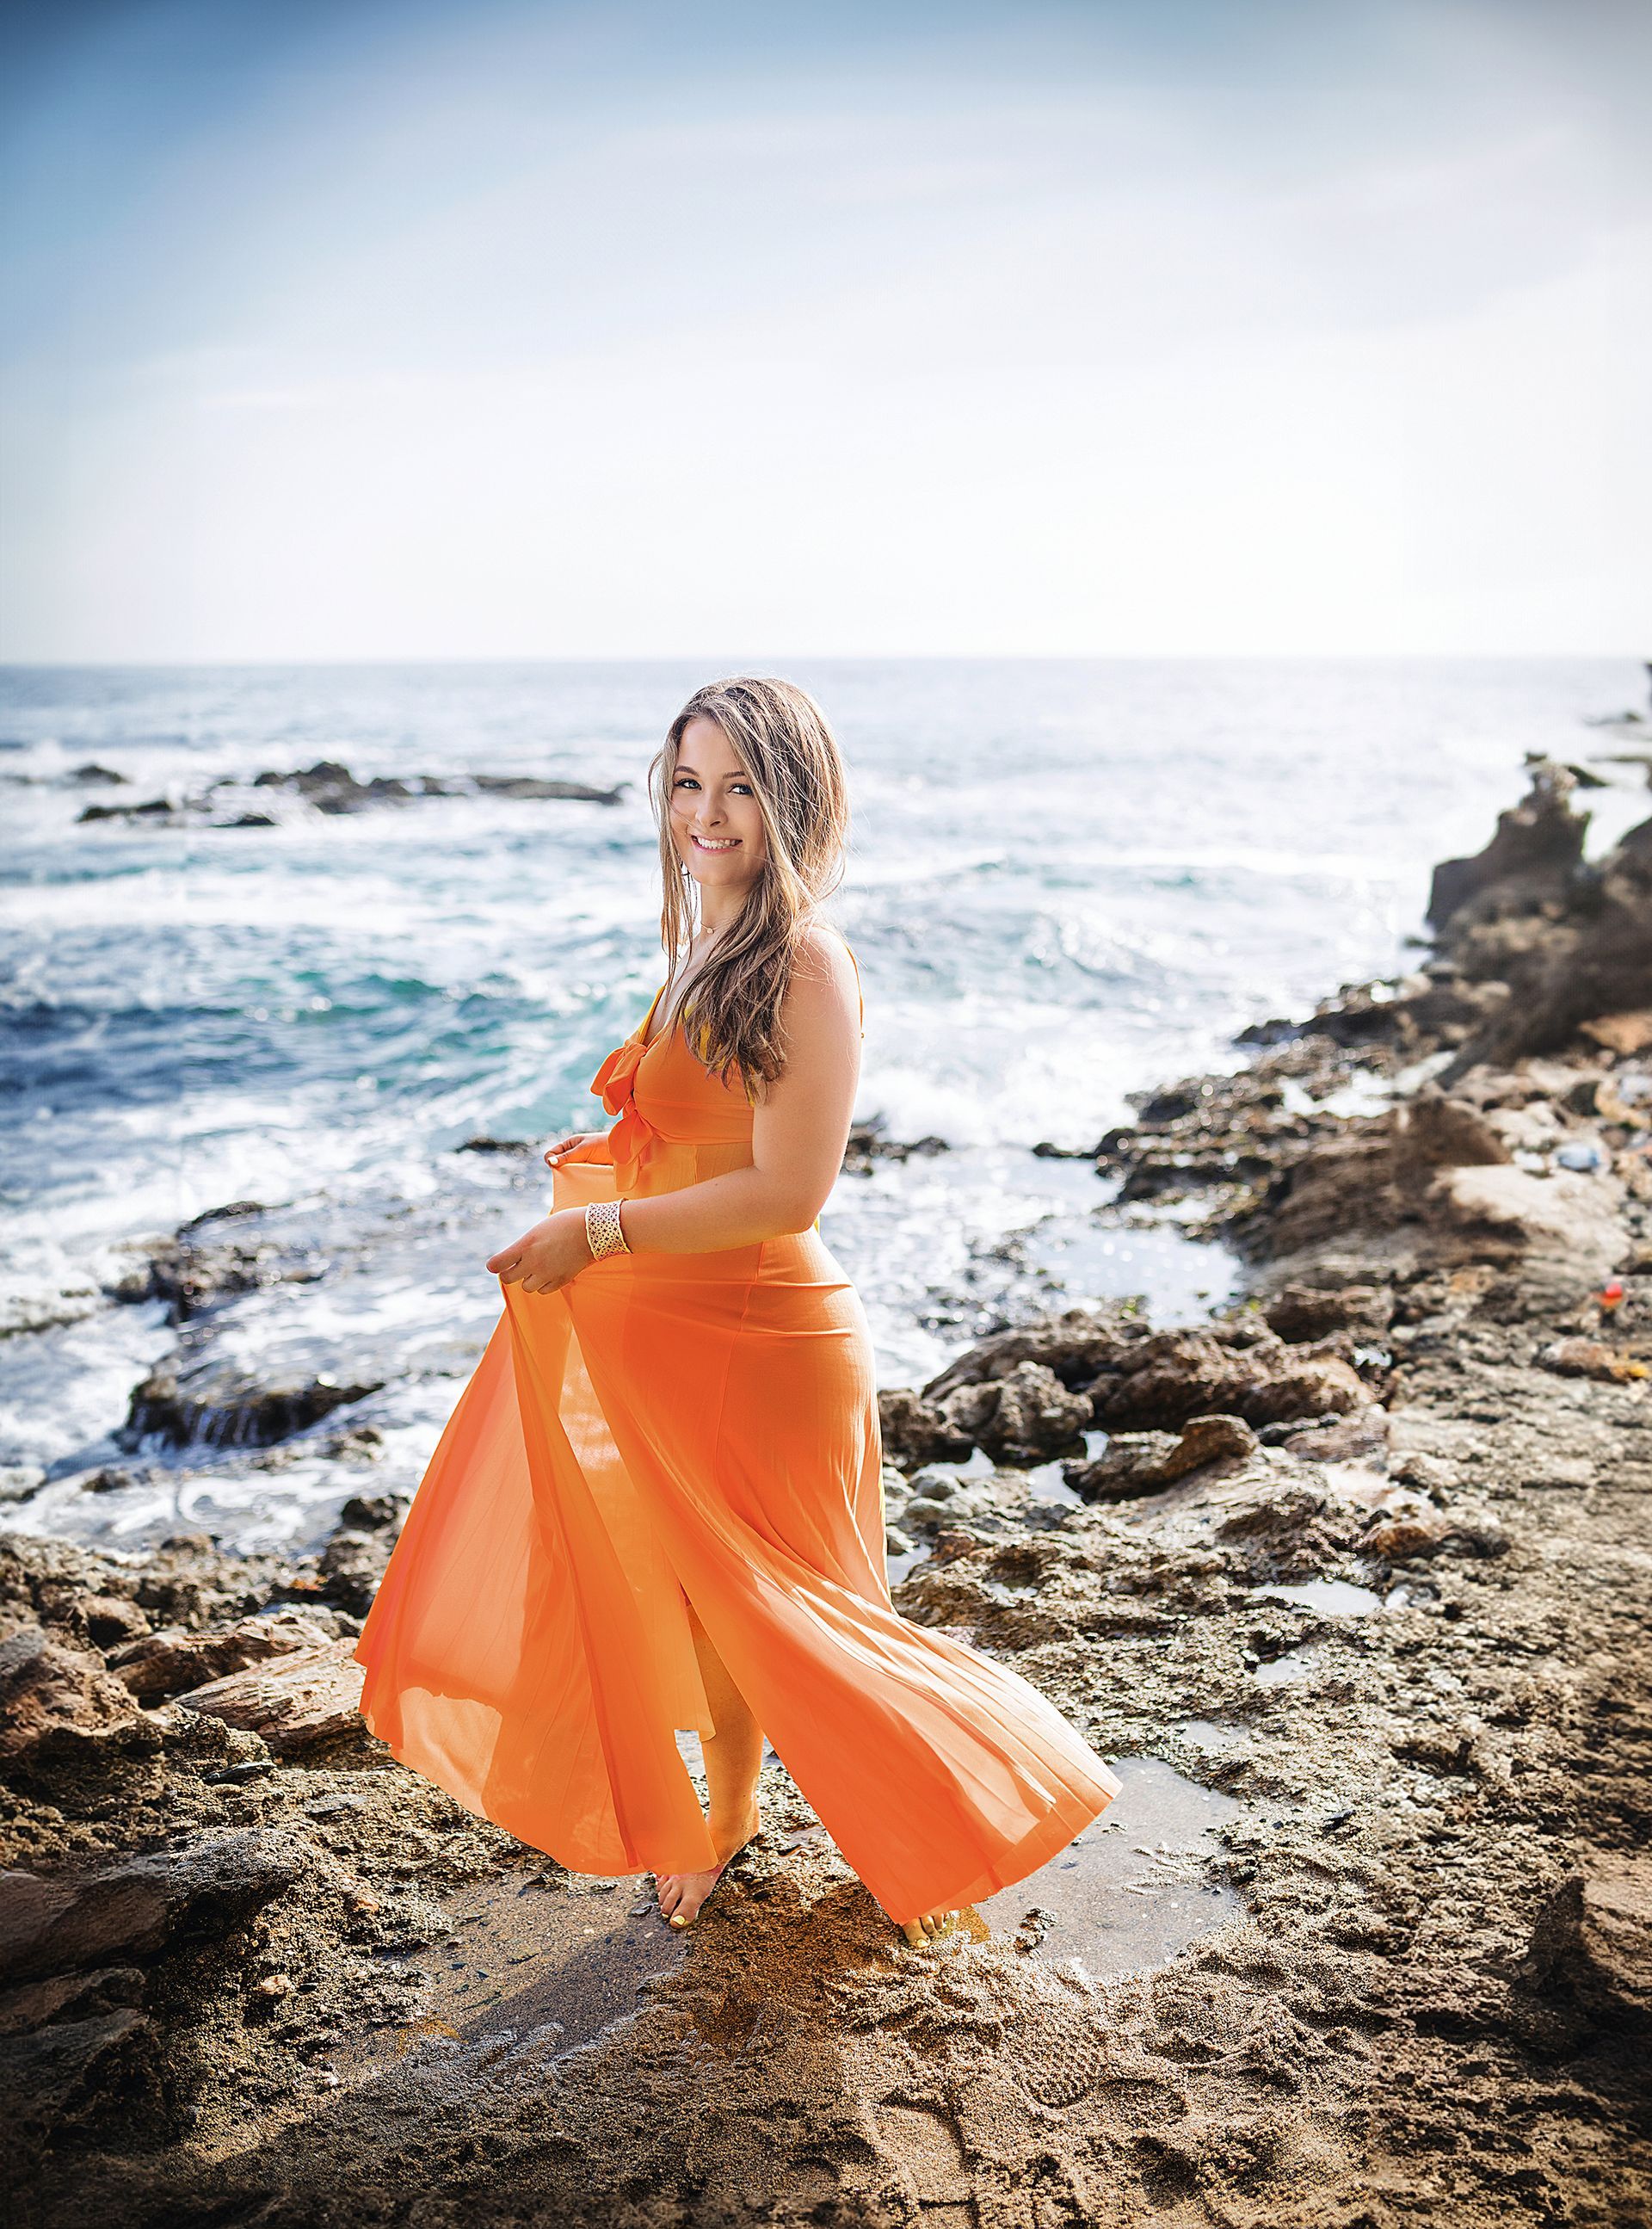 Victoria beach senior session with a throw the dress pose in front of the ocean.